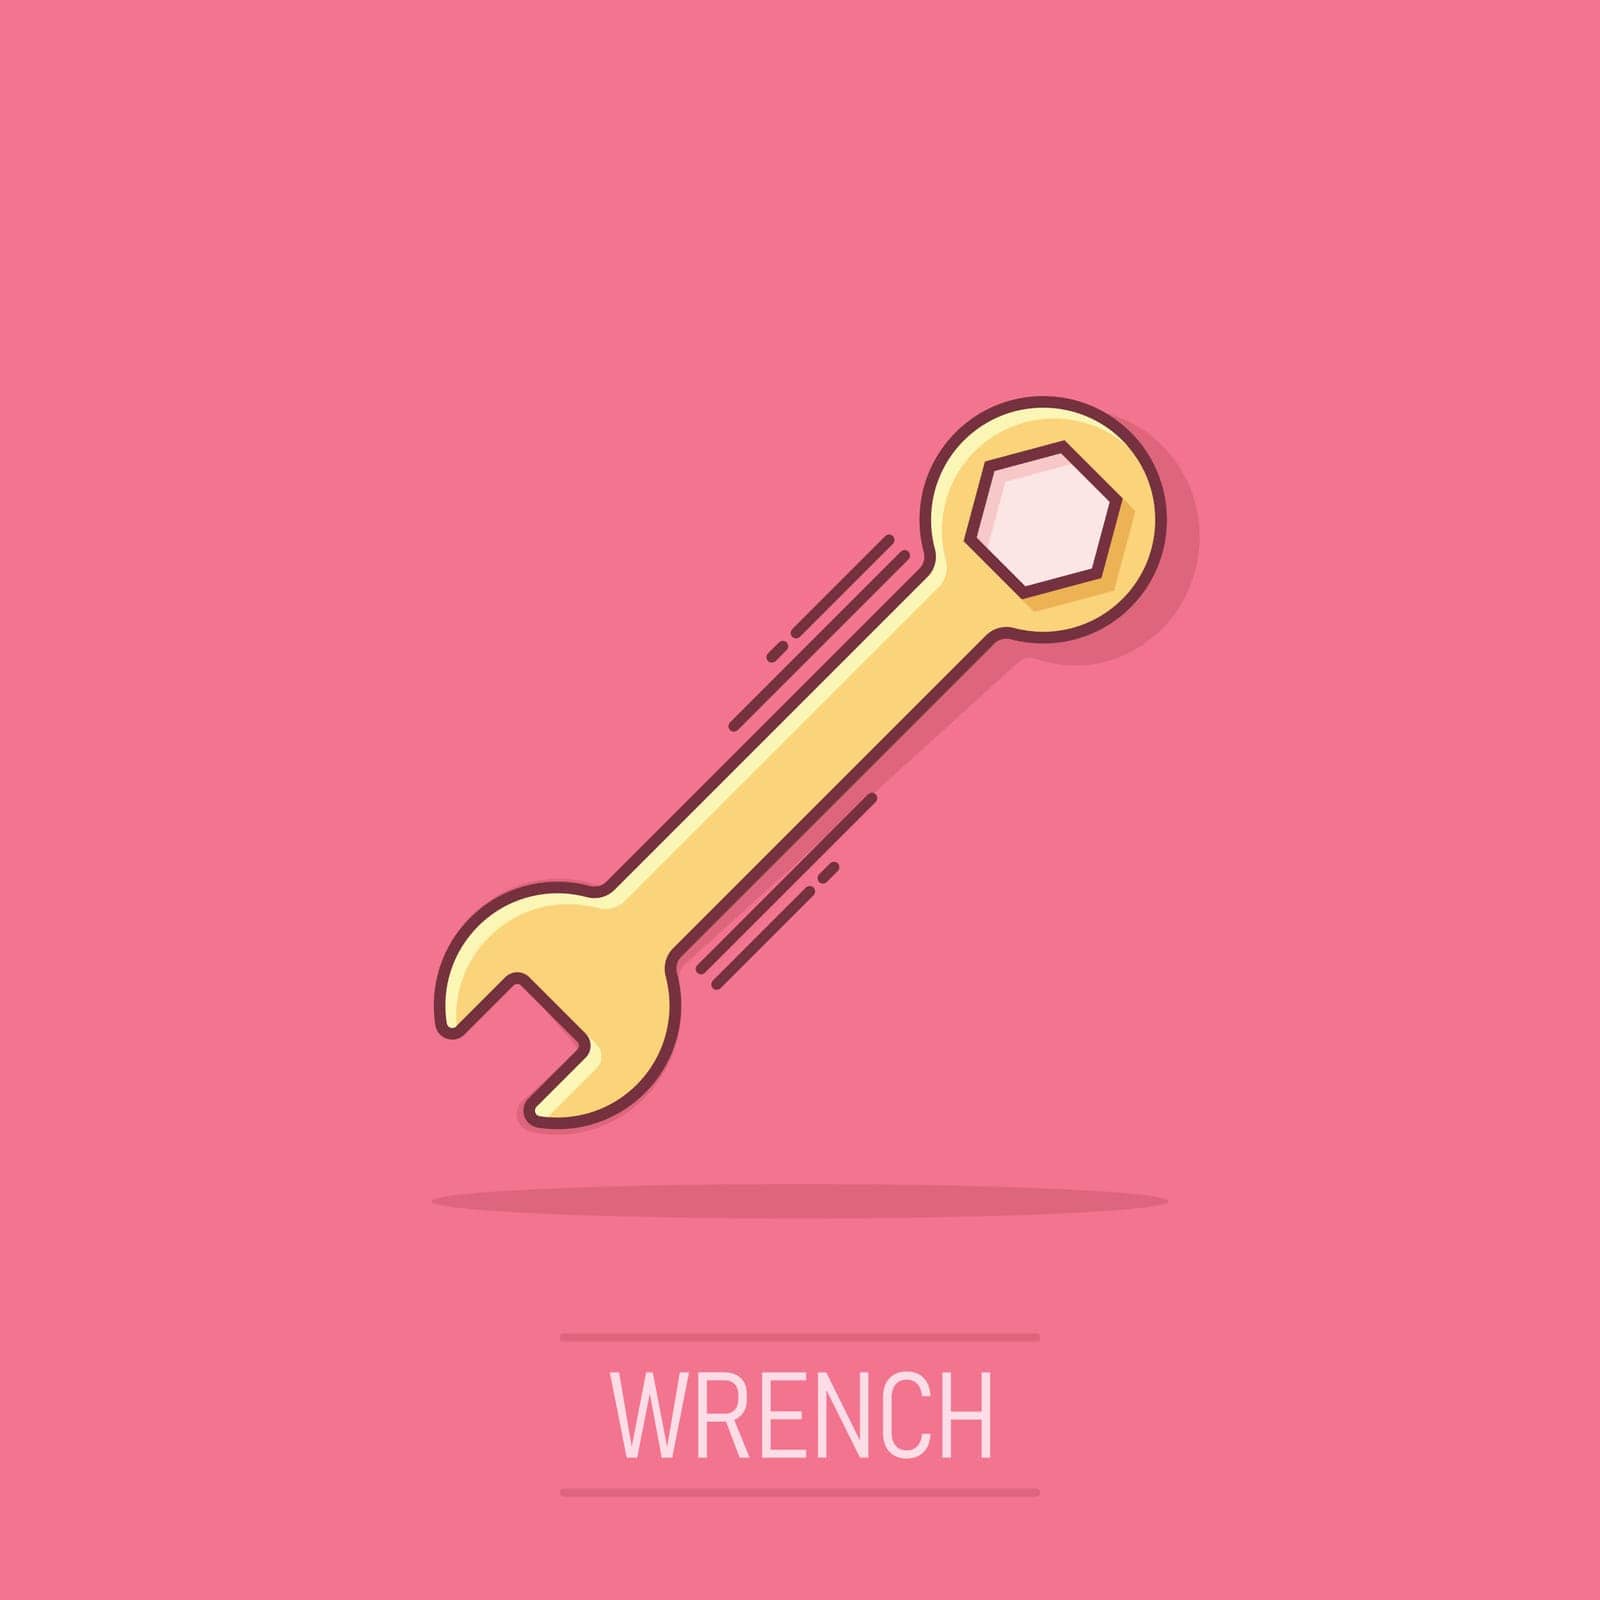 Wrench icon in comic style. Spanner key cartoon vector illustration on isolated background. Repair equipment splash effect business concept. by LysenkoA